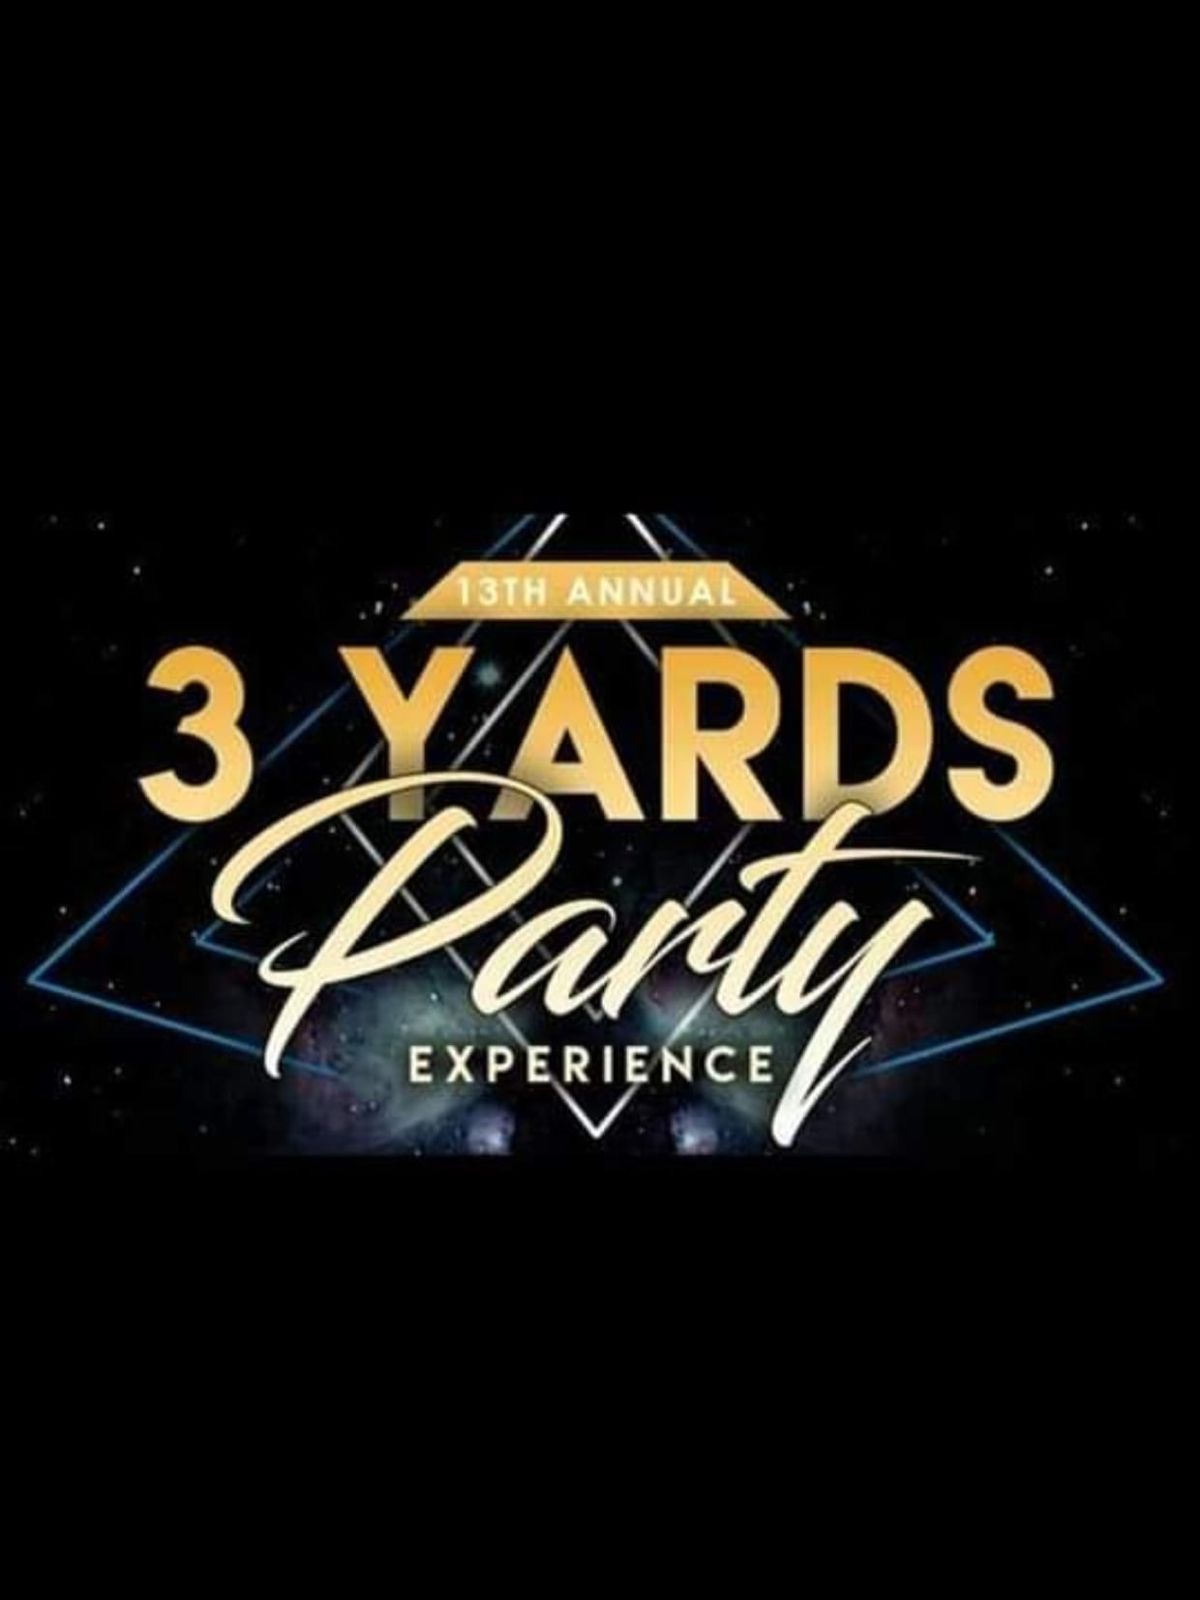 3 YARDS PARTY